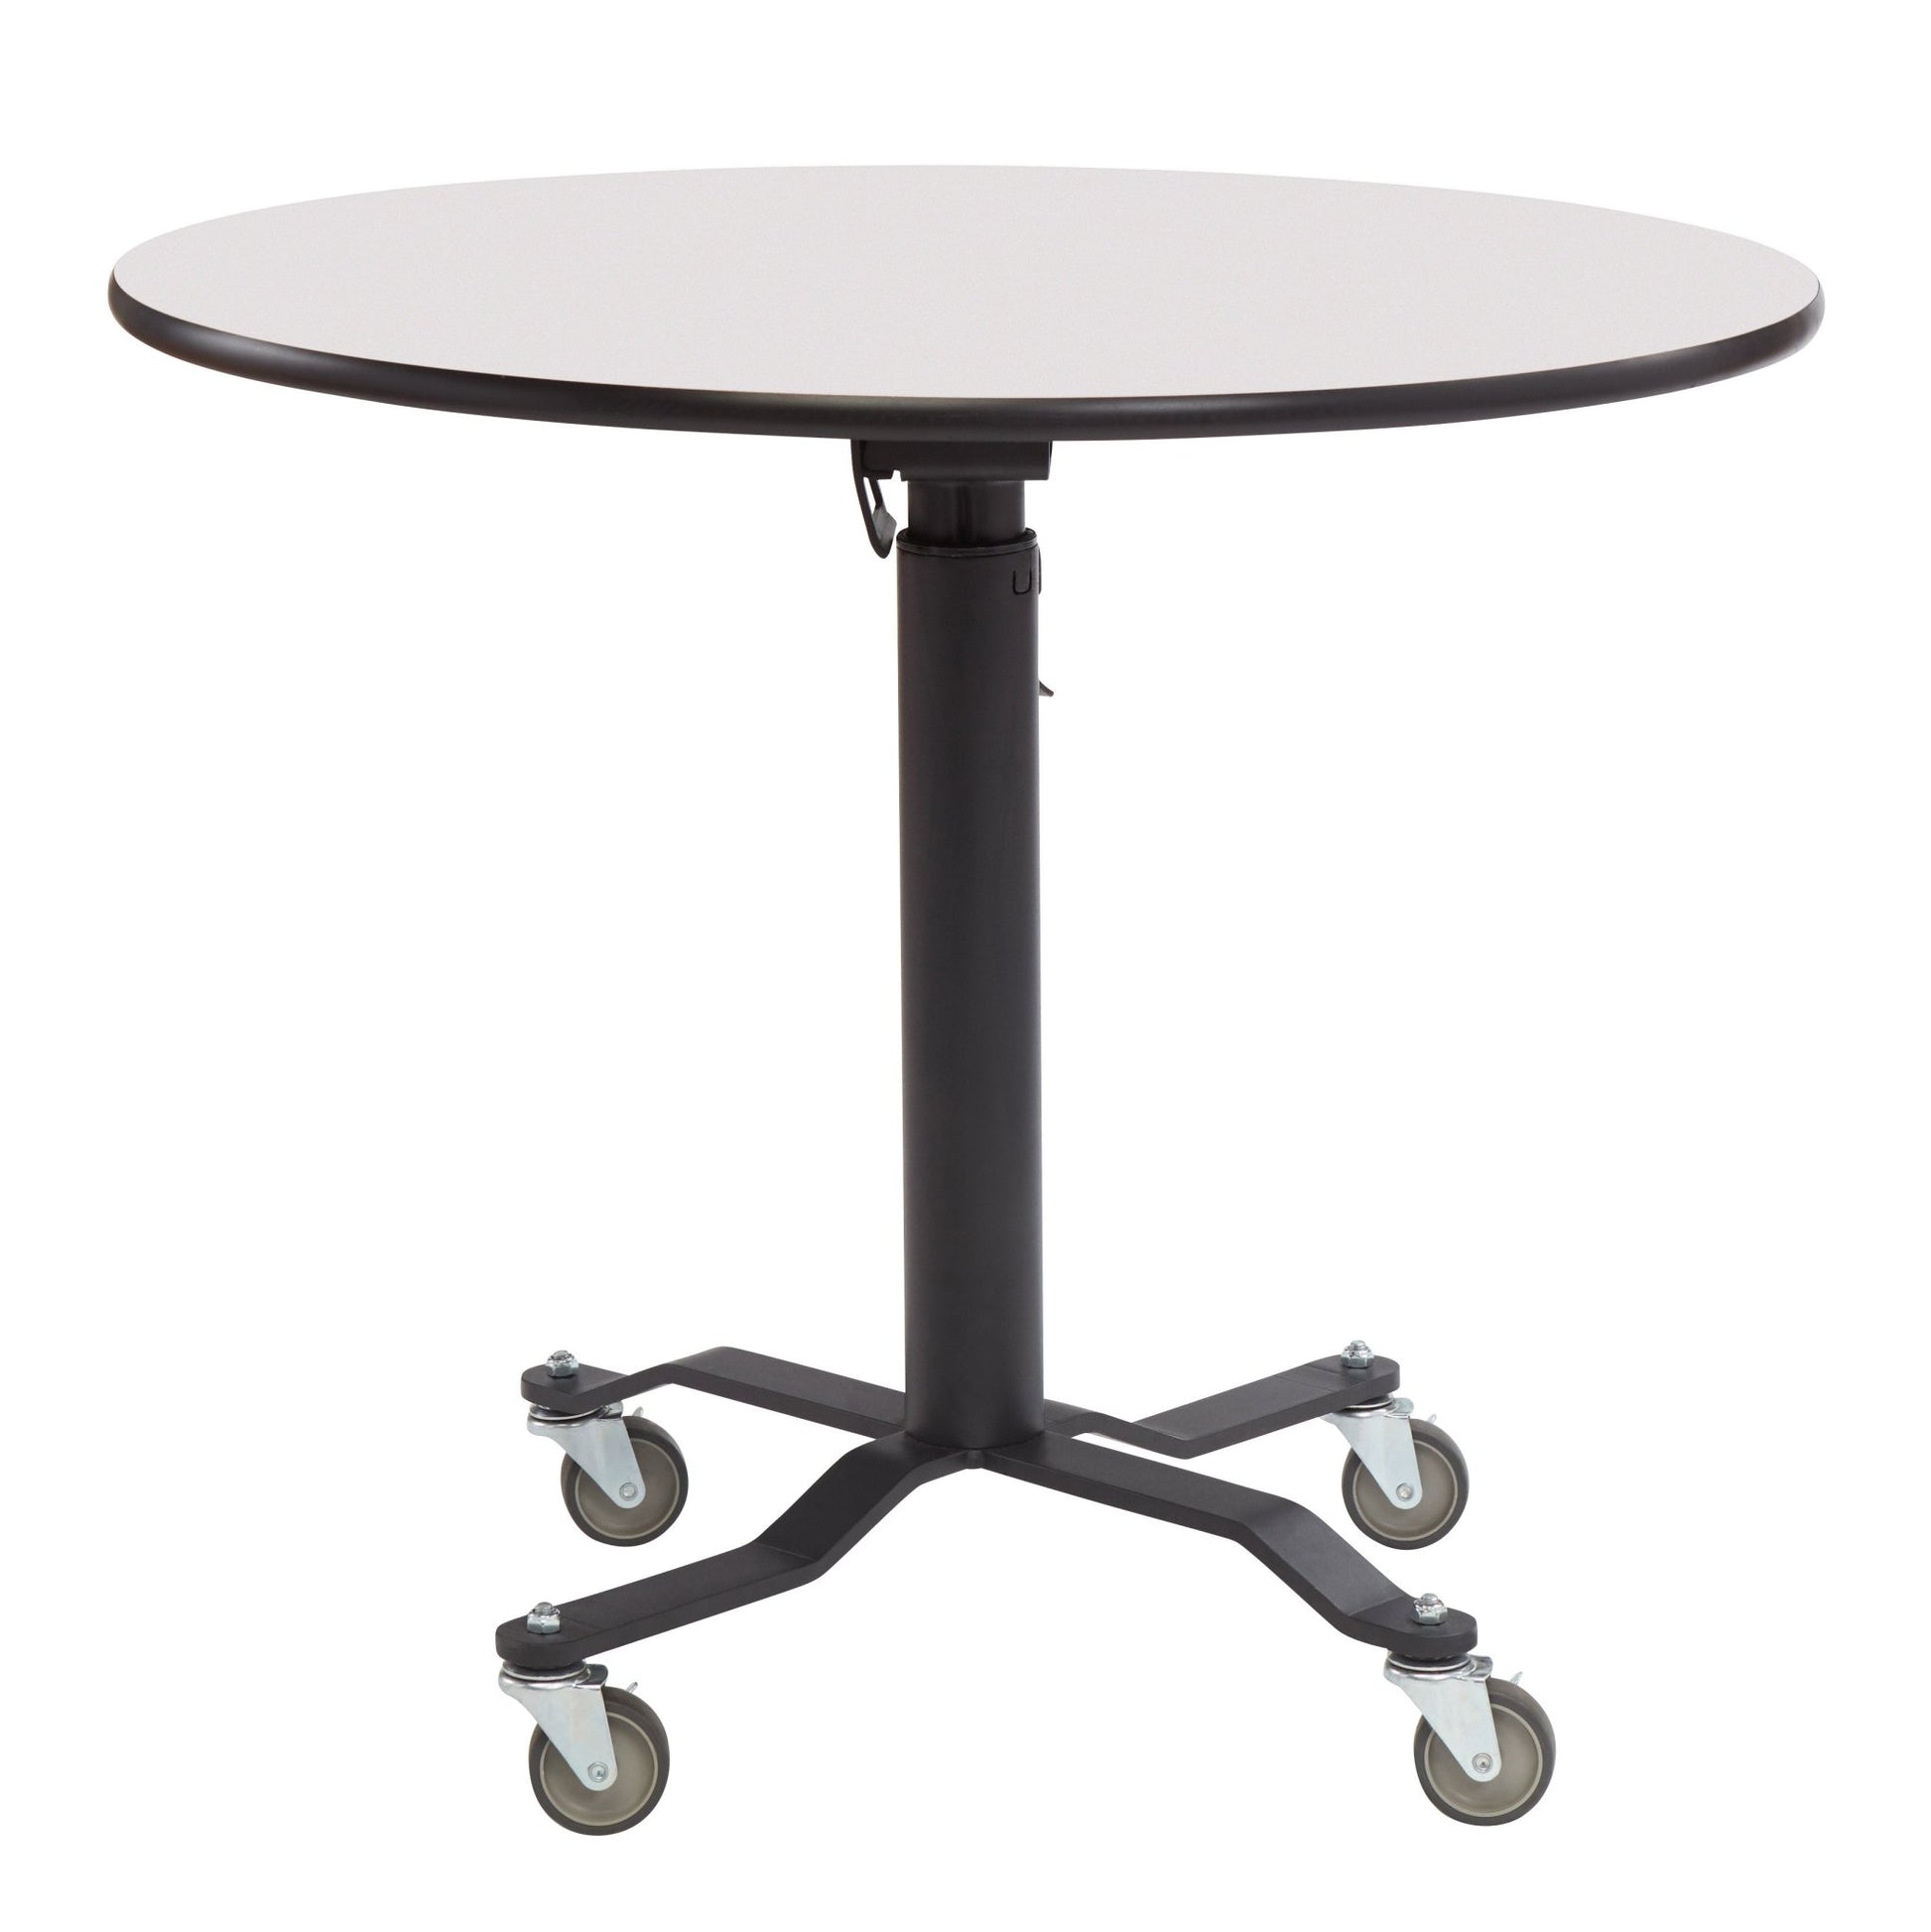 NPS Cafe Time II Table, 36" Round, Whiteboard Top, Particle Board, Vinyl T-Molding (NationalPublic Seating NPS-PCT136PBTMWB) - SchoolOutlet